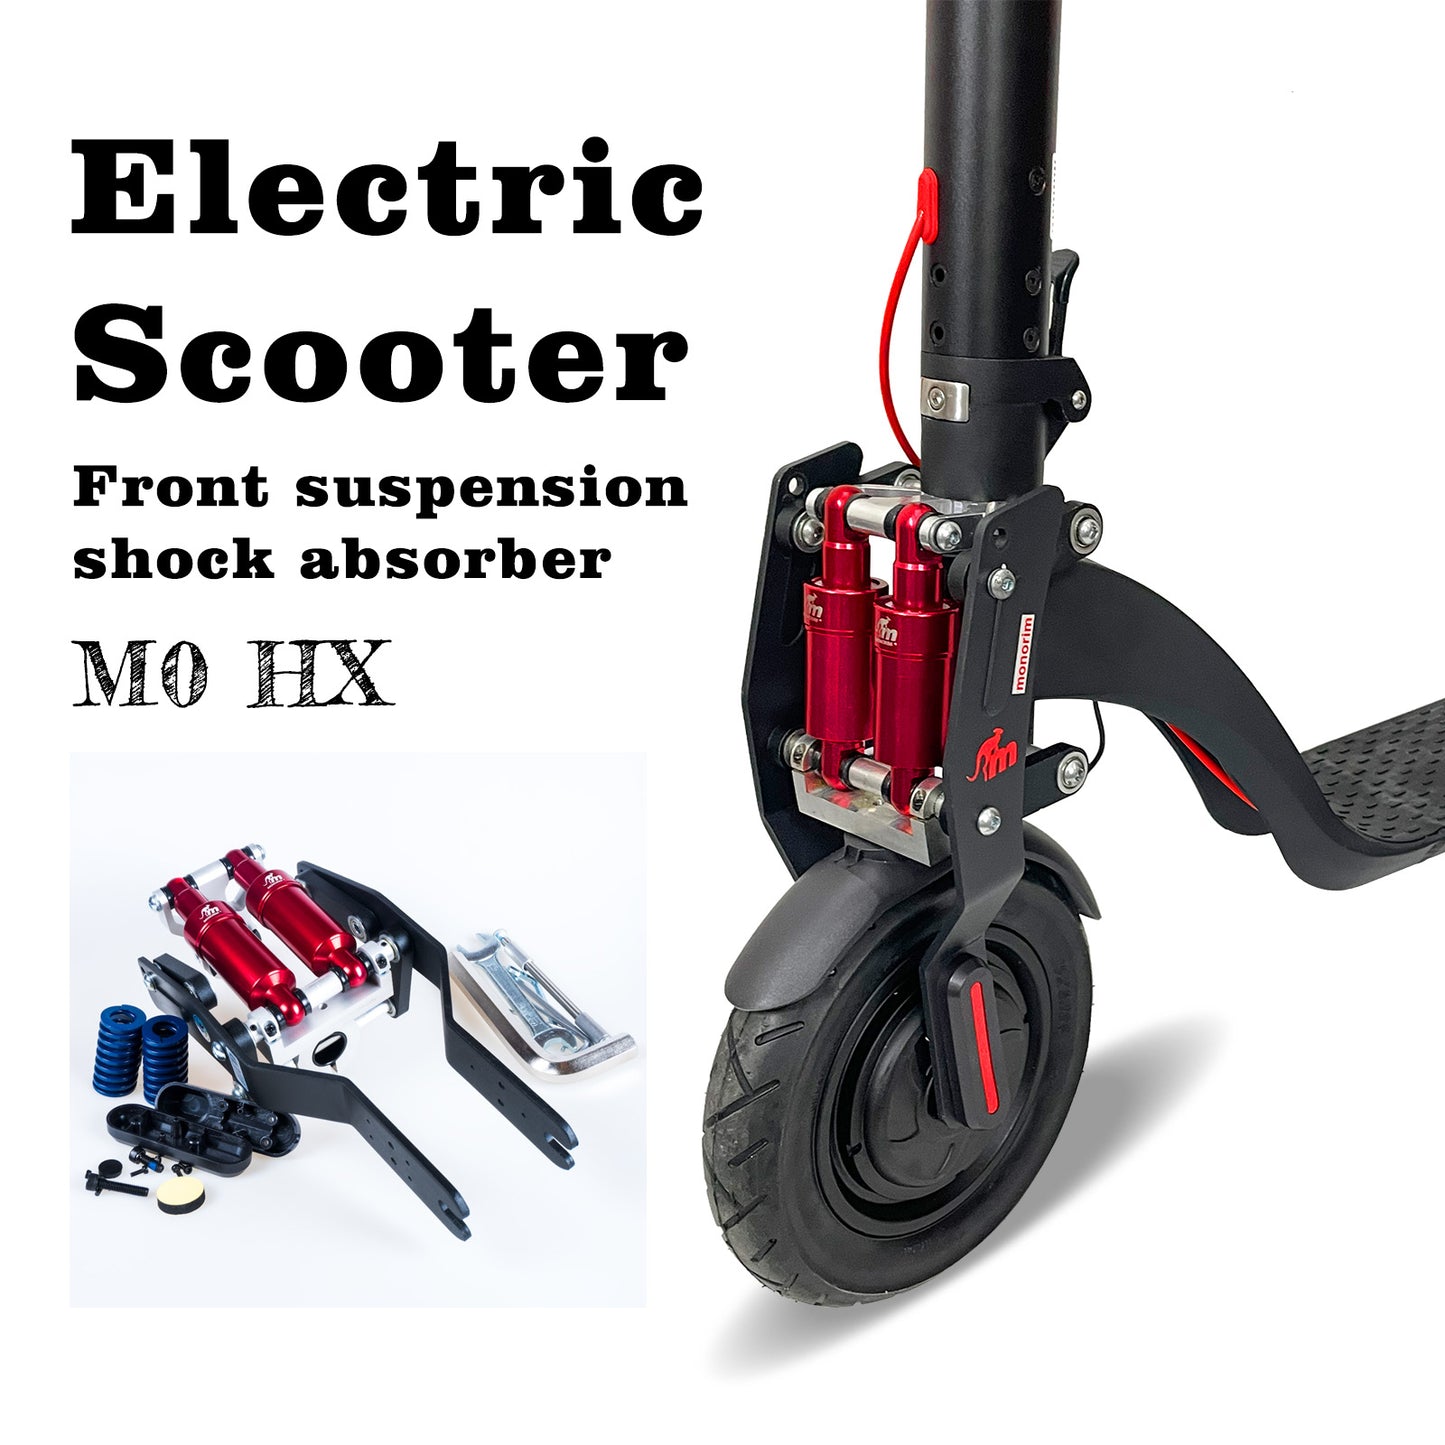 Monorim M0-HX Dual Front Suspension For HX x7/x8 pro Scooter DUAL Absorber Shock Accessories Section Best Upgrade Kits